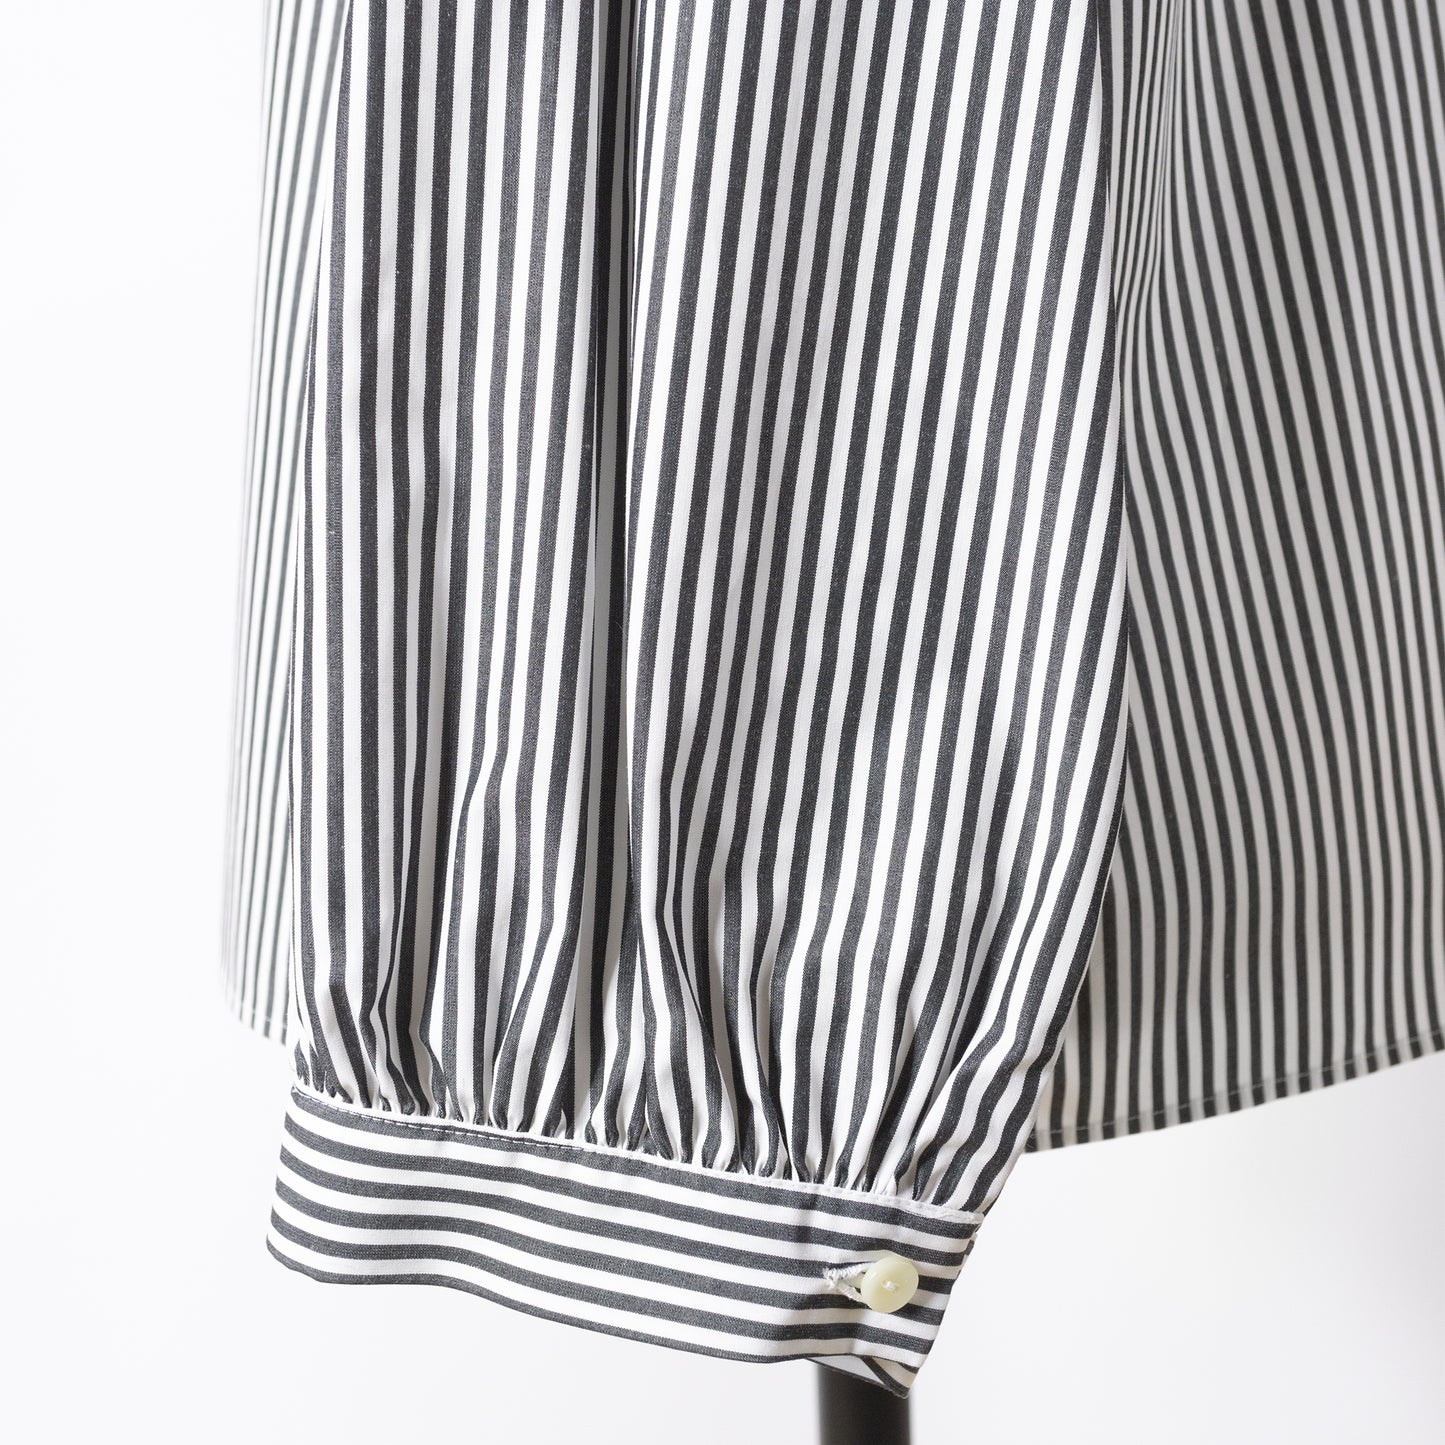 24SS STAMP AND DIARY STRIPE GATHER SLEEVE BLOUSE